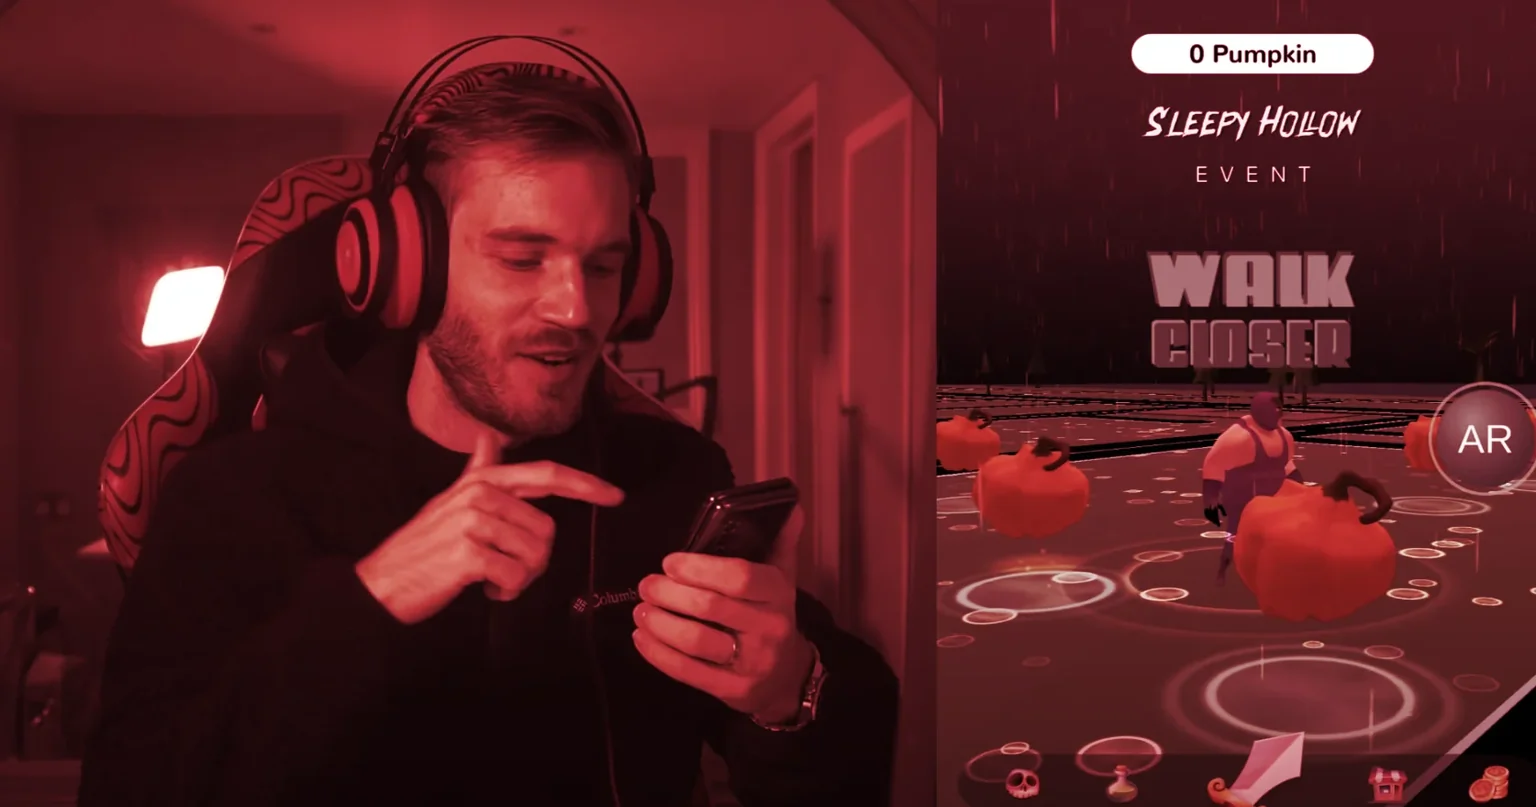 PewDiePie demonstrated Wallem on his YouTube channel. Image: YouTube